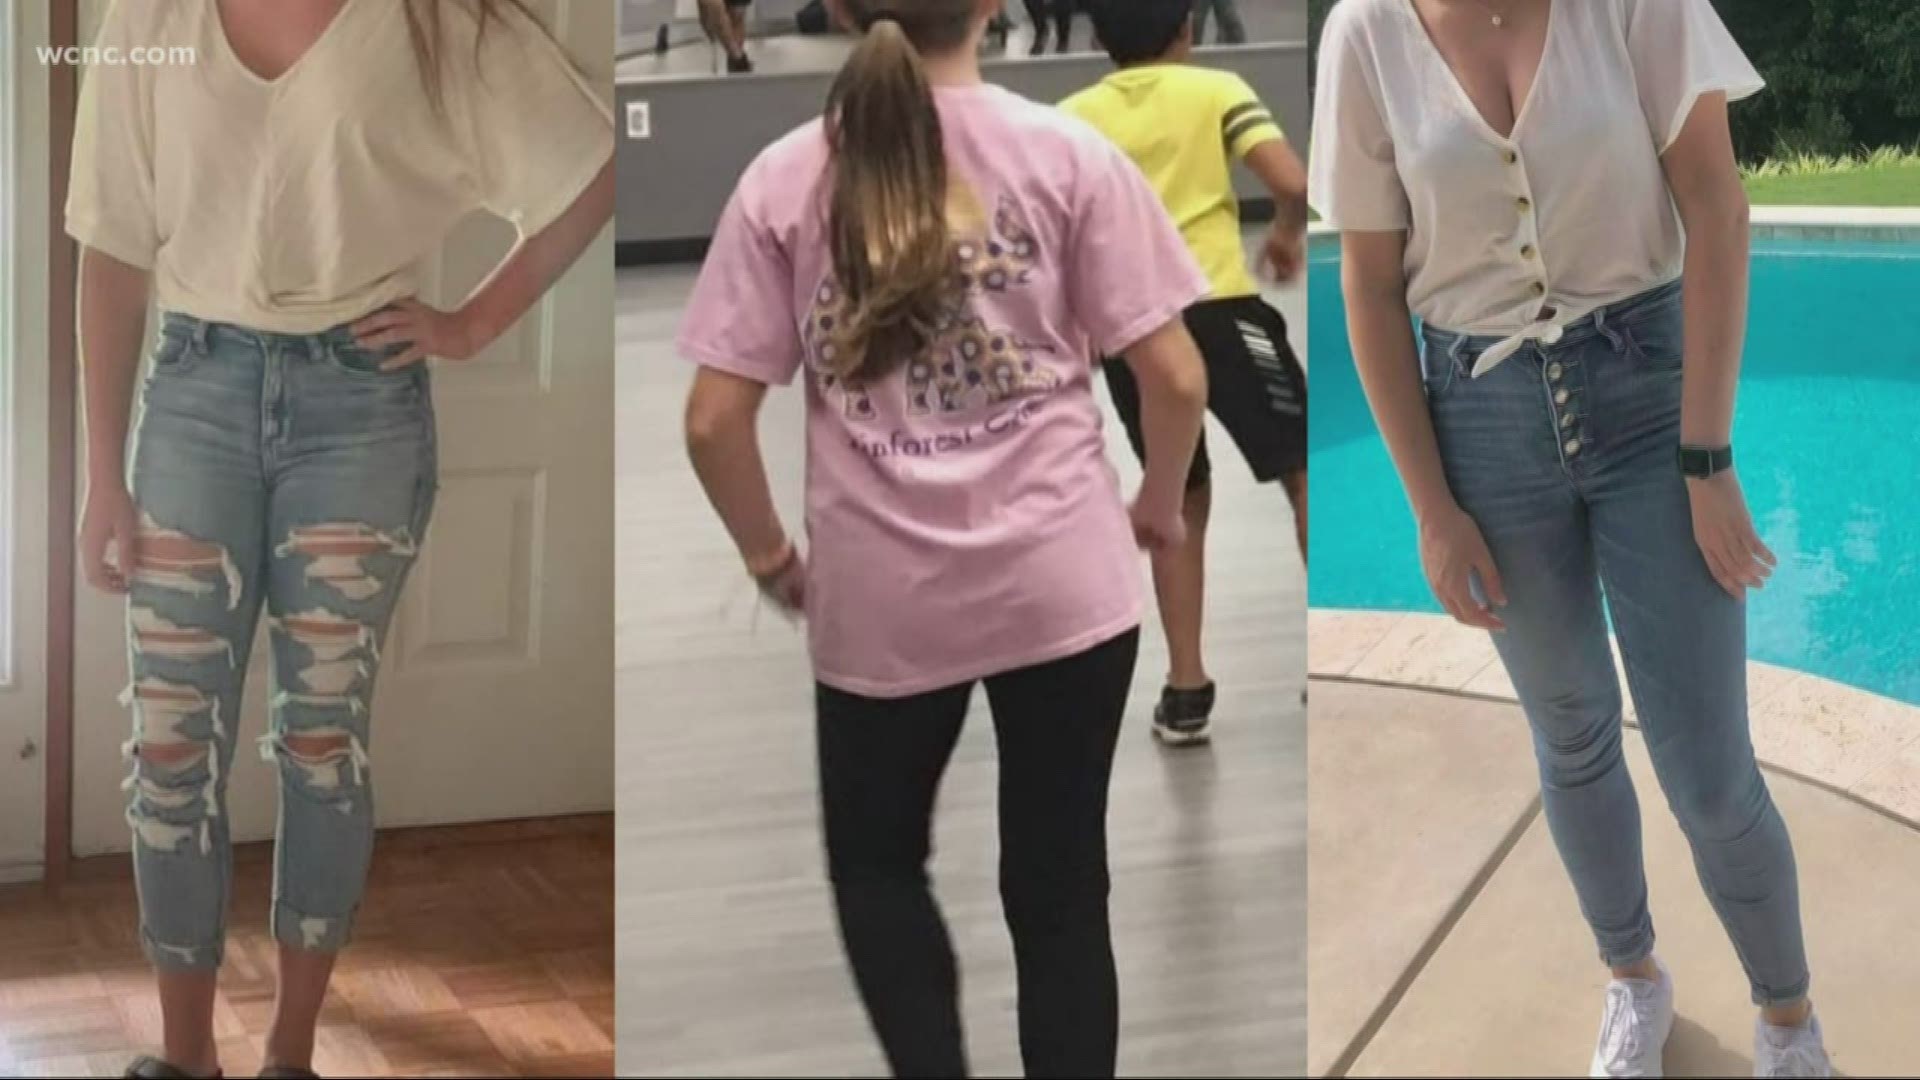 The dress code debate at Fort Mill schools has finally sparked change after students and parents voiced their concerns calling the current policy unfair.